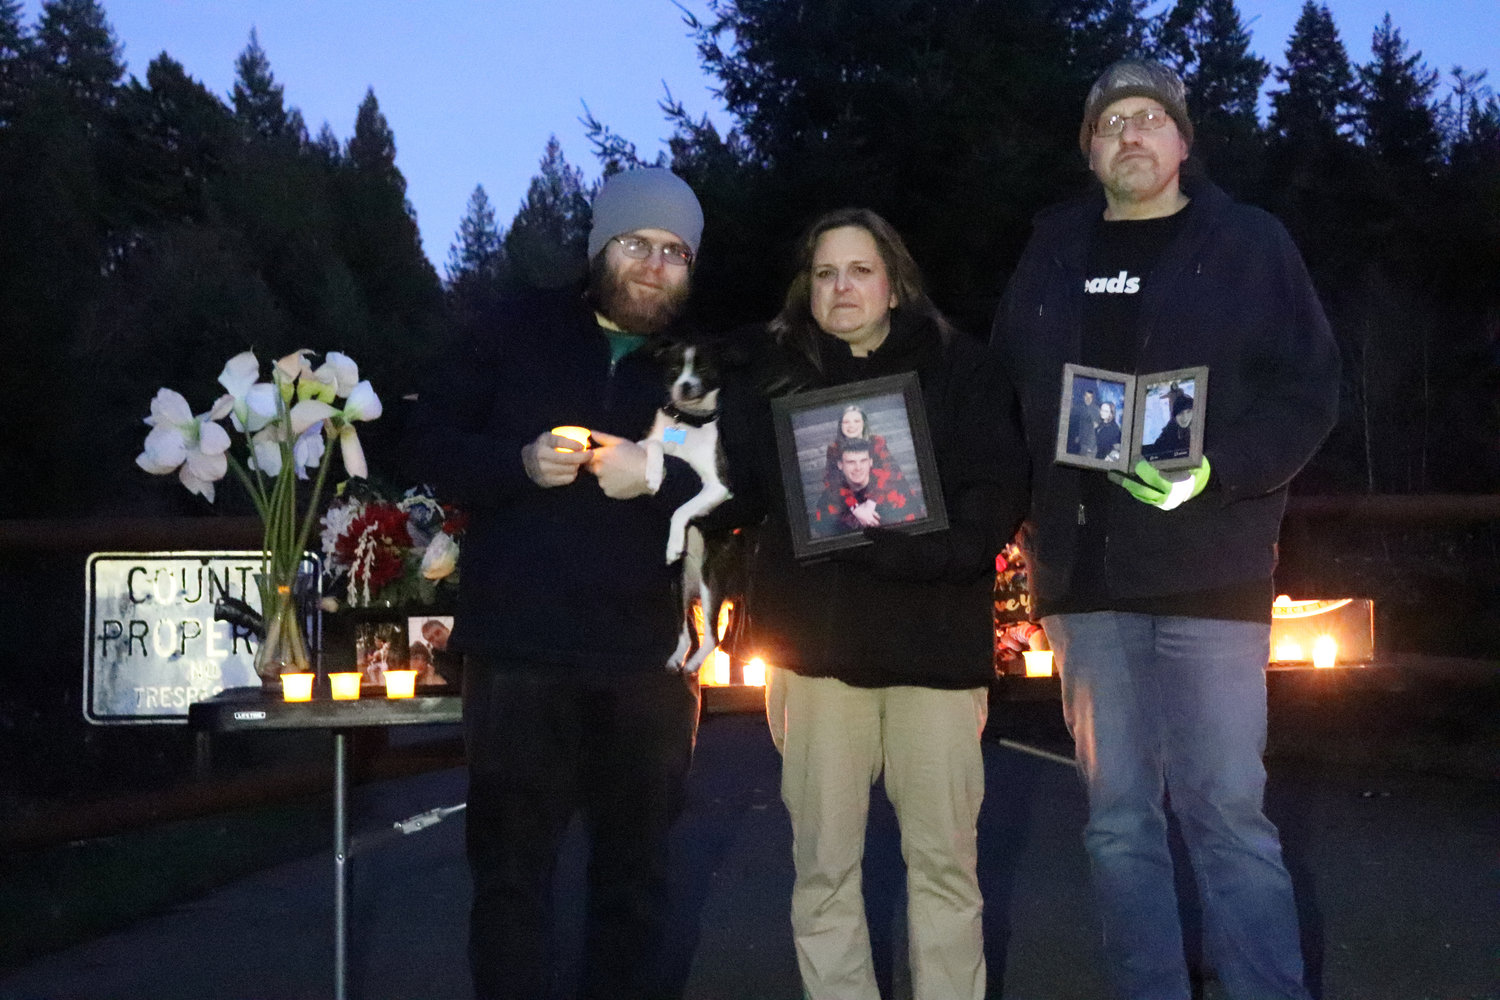 Mitchell Davidson Link’s family, from left, Colton Hammons, Marci Hammons and Rick Gilbreath.